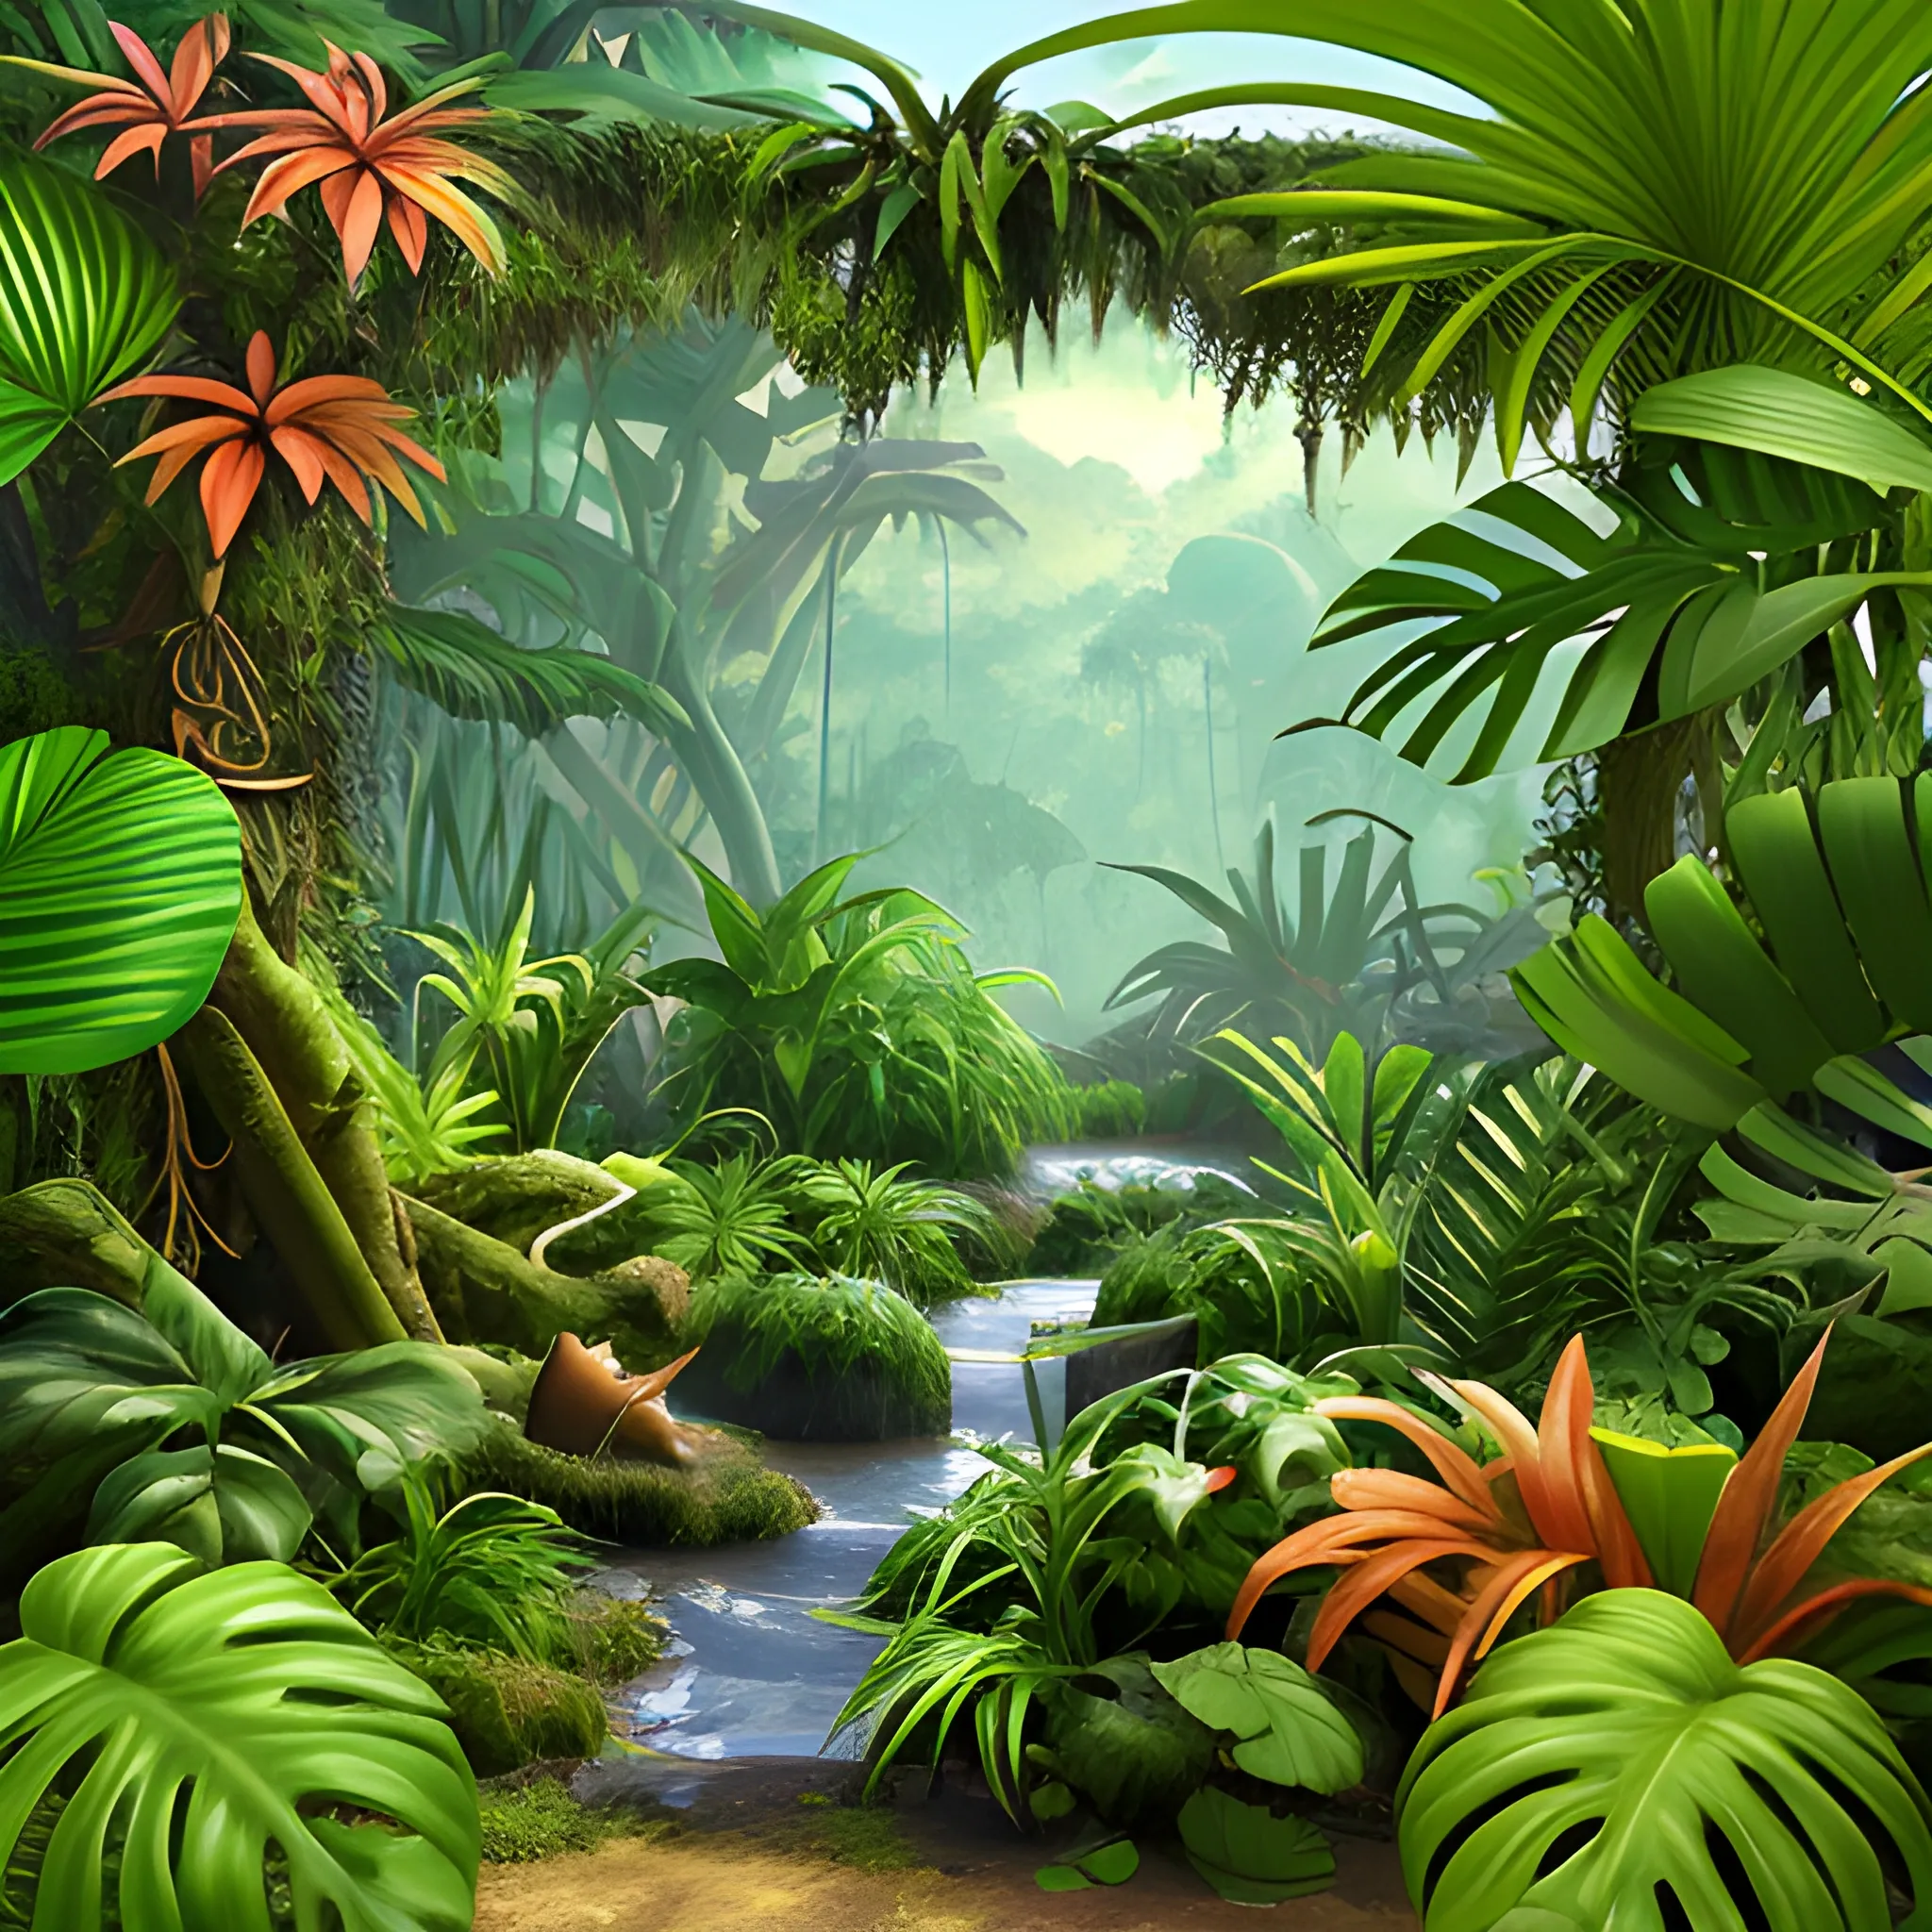 jungle scene with many different plants and no animals, 3D